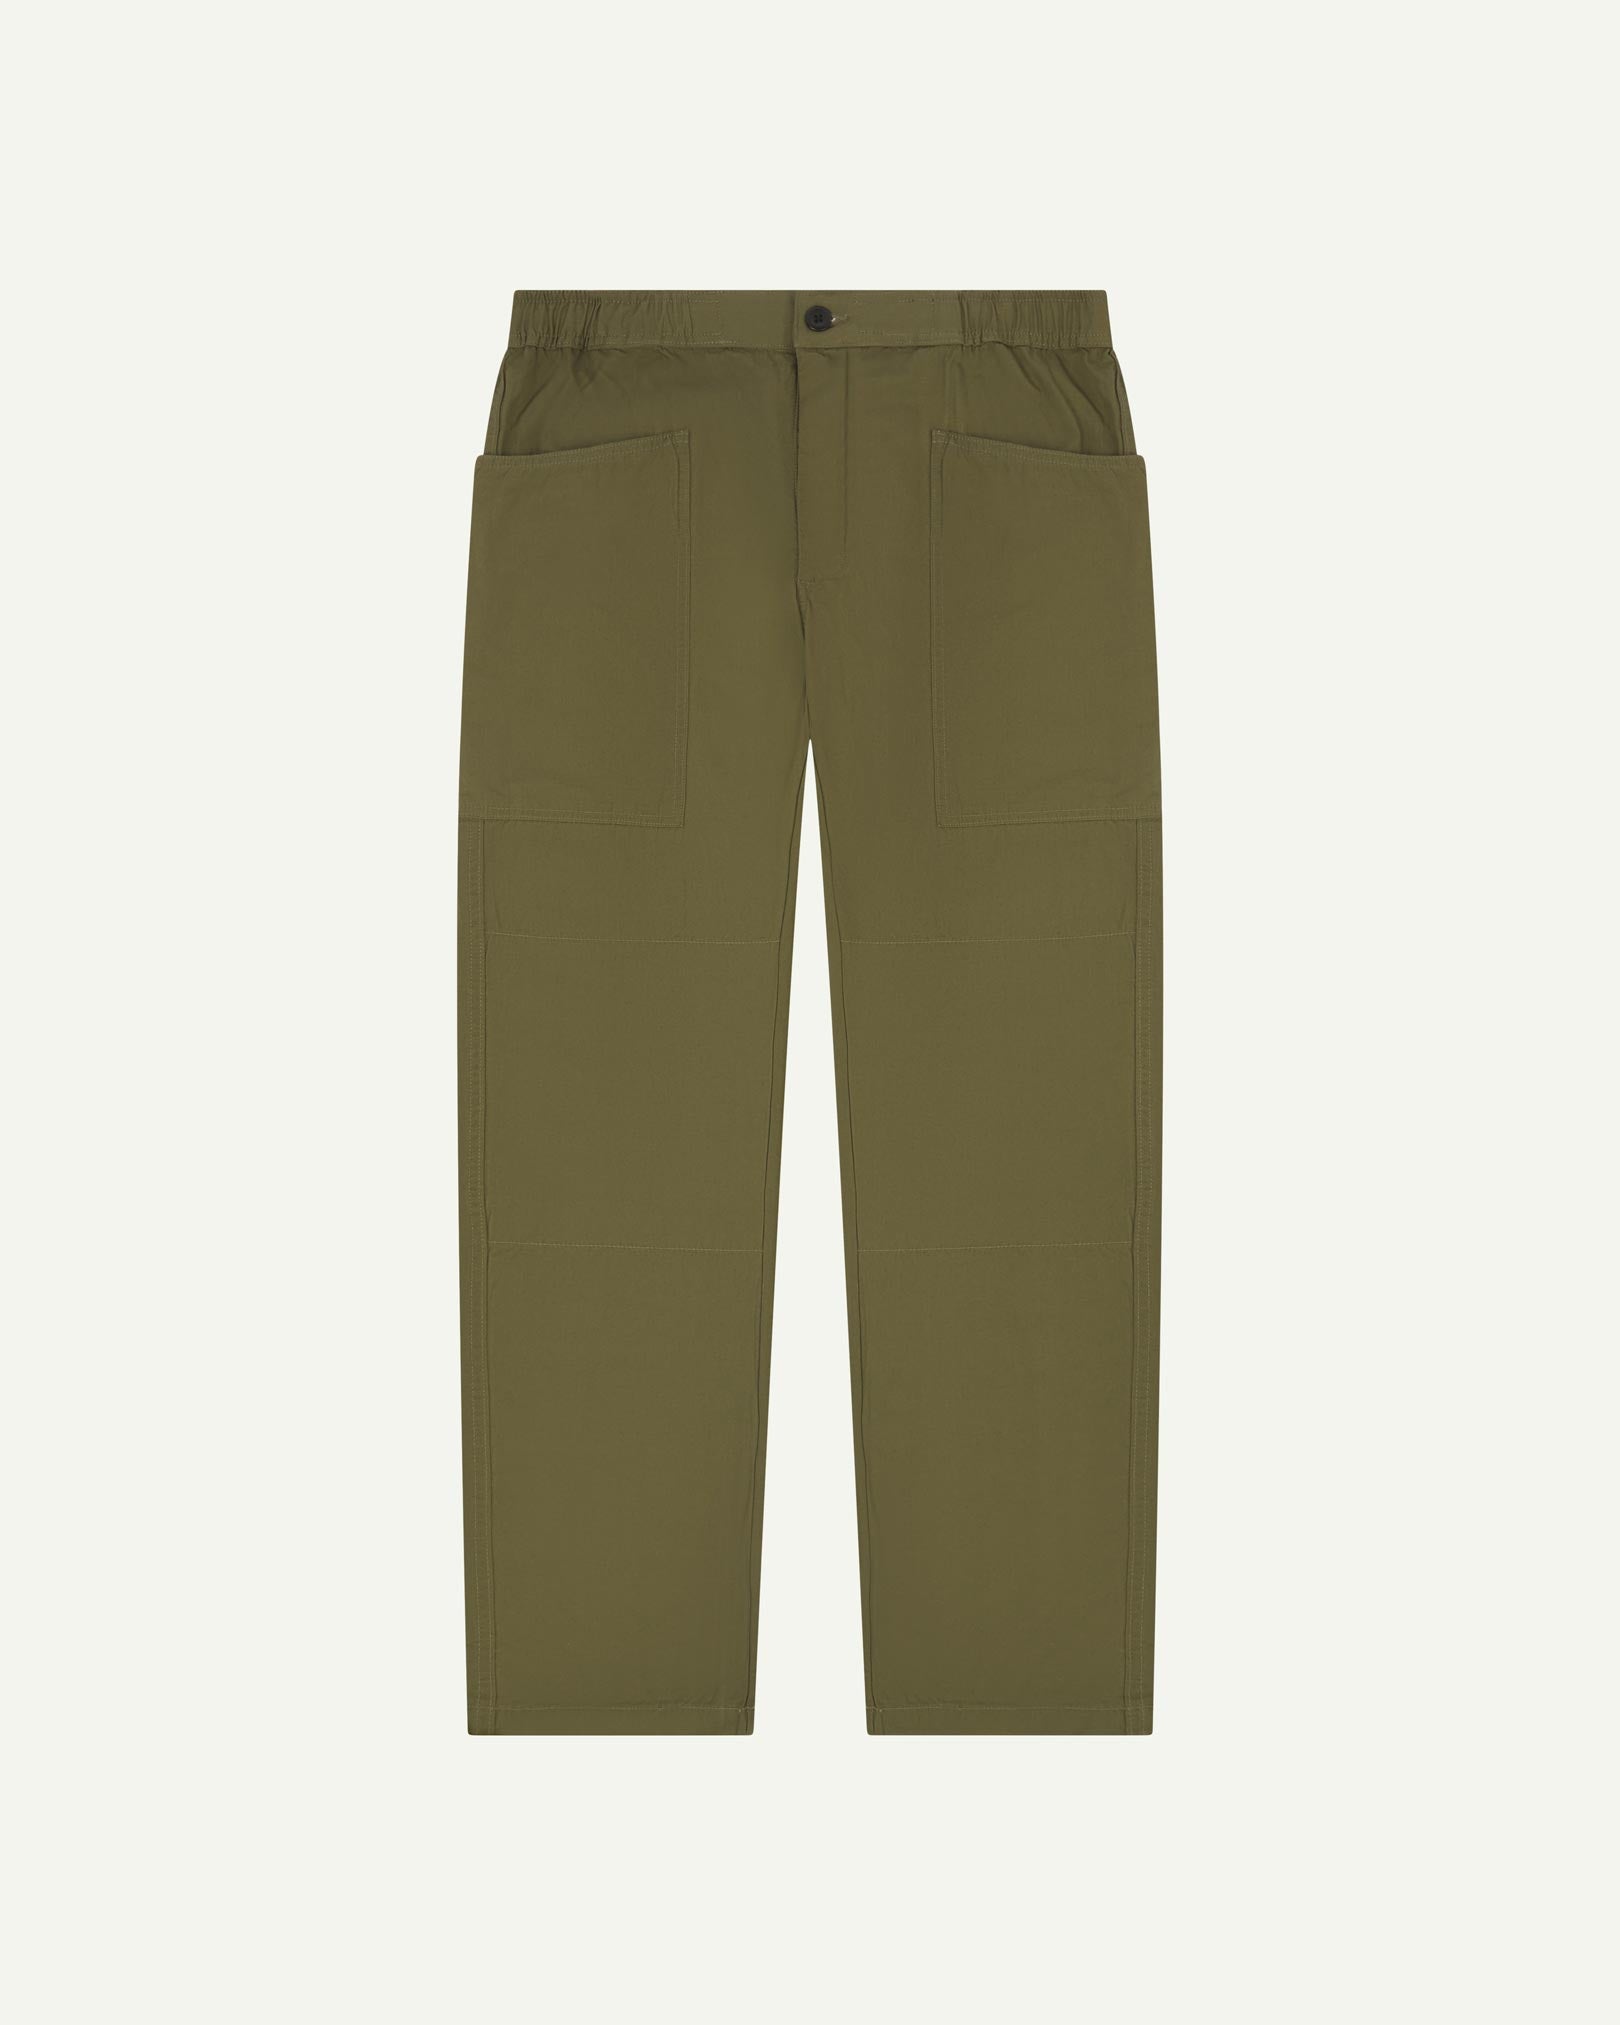 Front shot of 5011 Uskees men's organic 'olive-green' casual trousers. Clearly showing the elasticated waist, front pockets and tapered leg.